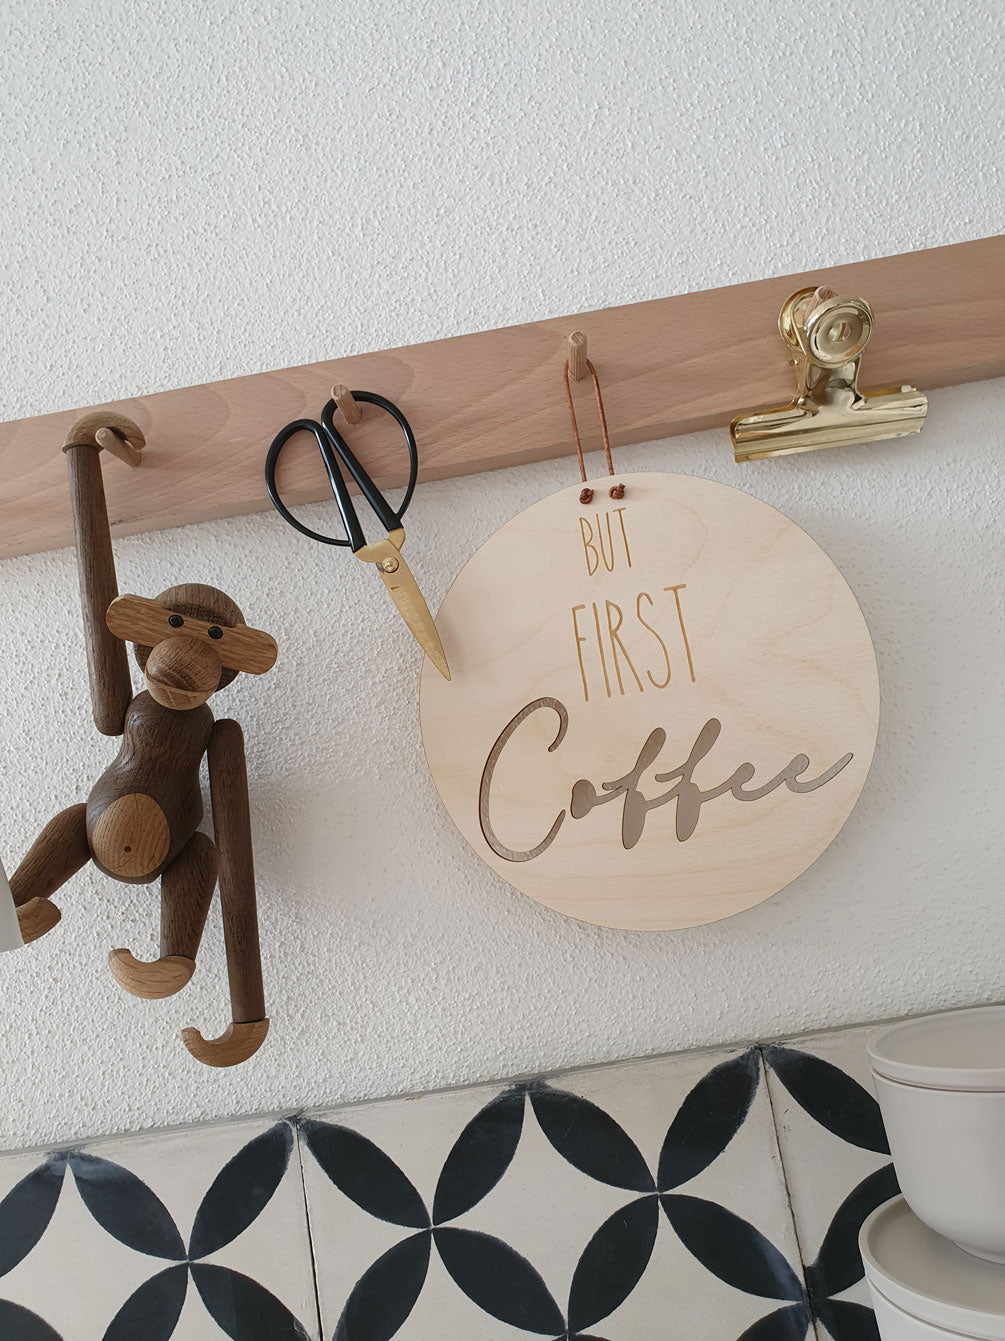 Holzschild "BUT FIRST Coffee"